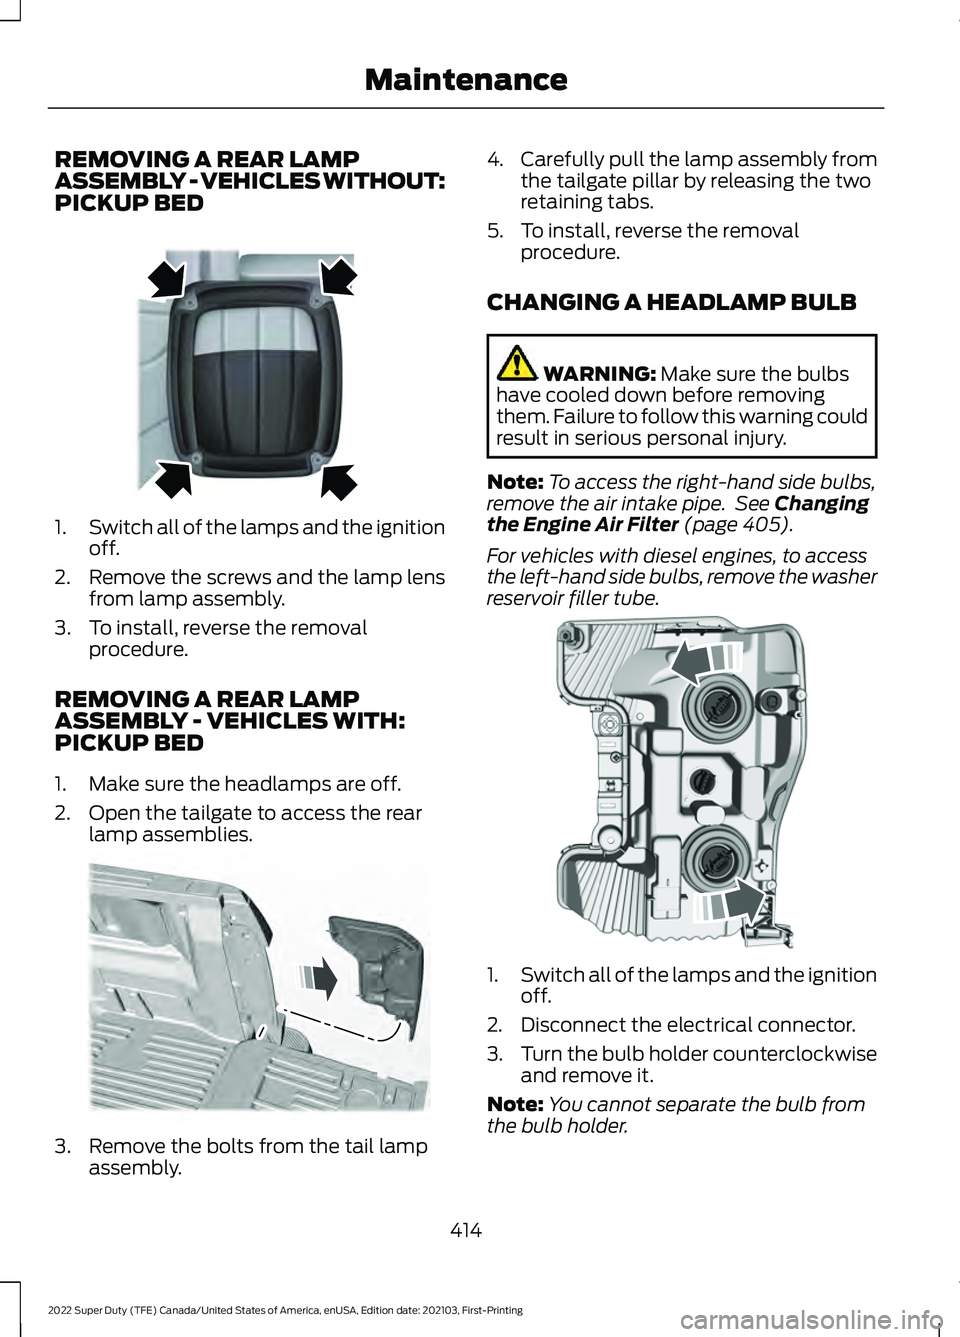 FORD F-450 2022  Owners Manual REMOVING A REAR LAMP
ASSEMBLY - VEHICLES WITHOUT:
PICKUP BED
1.
Switch all of the lamps and the ignition
off.
2. Remove the screws and the lamp lens from lamp assembly.
3. To install, reverse the remo